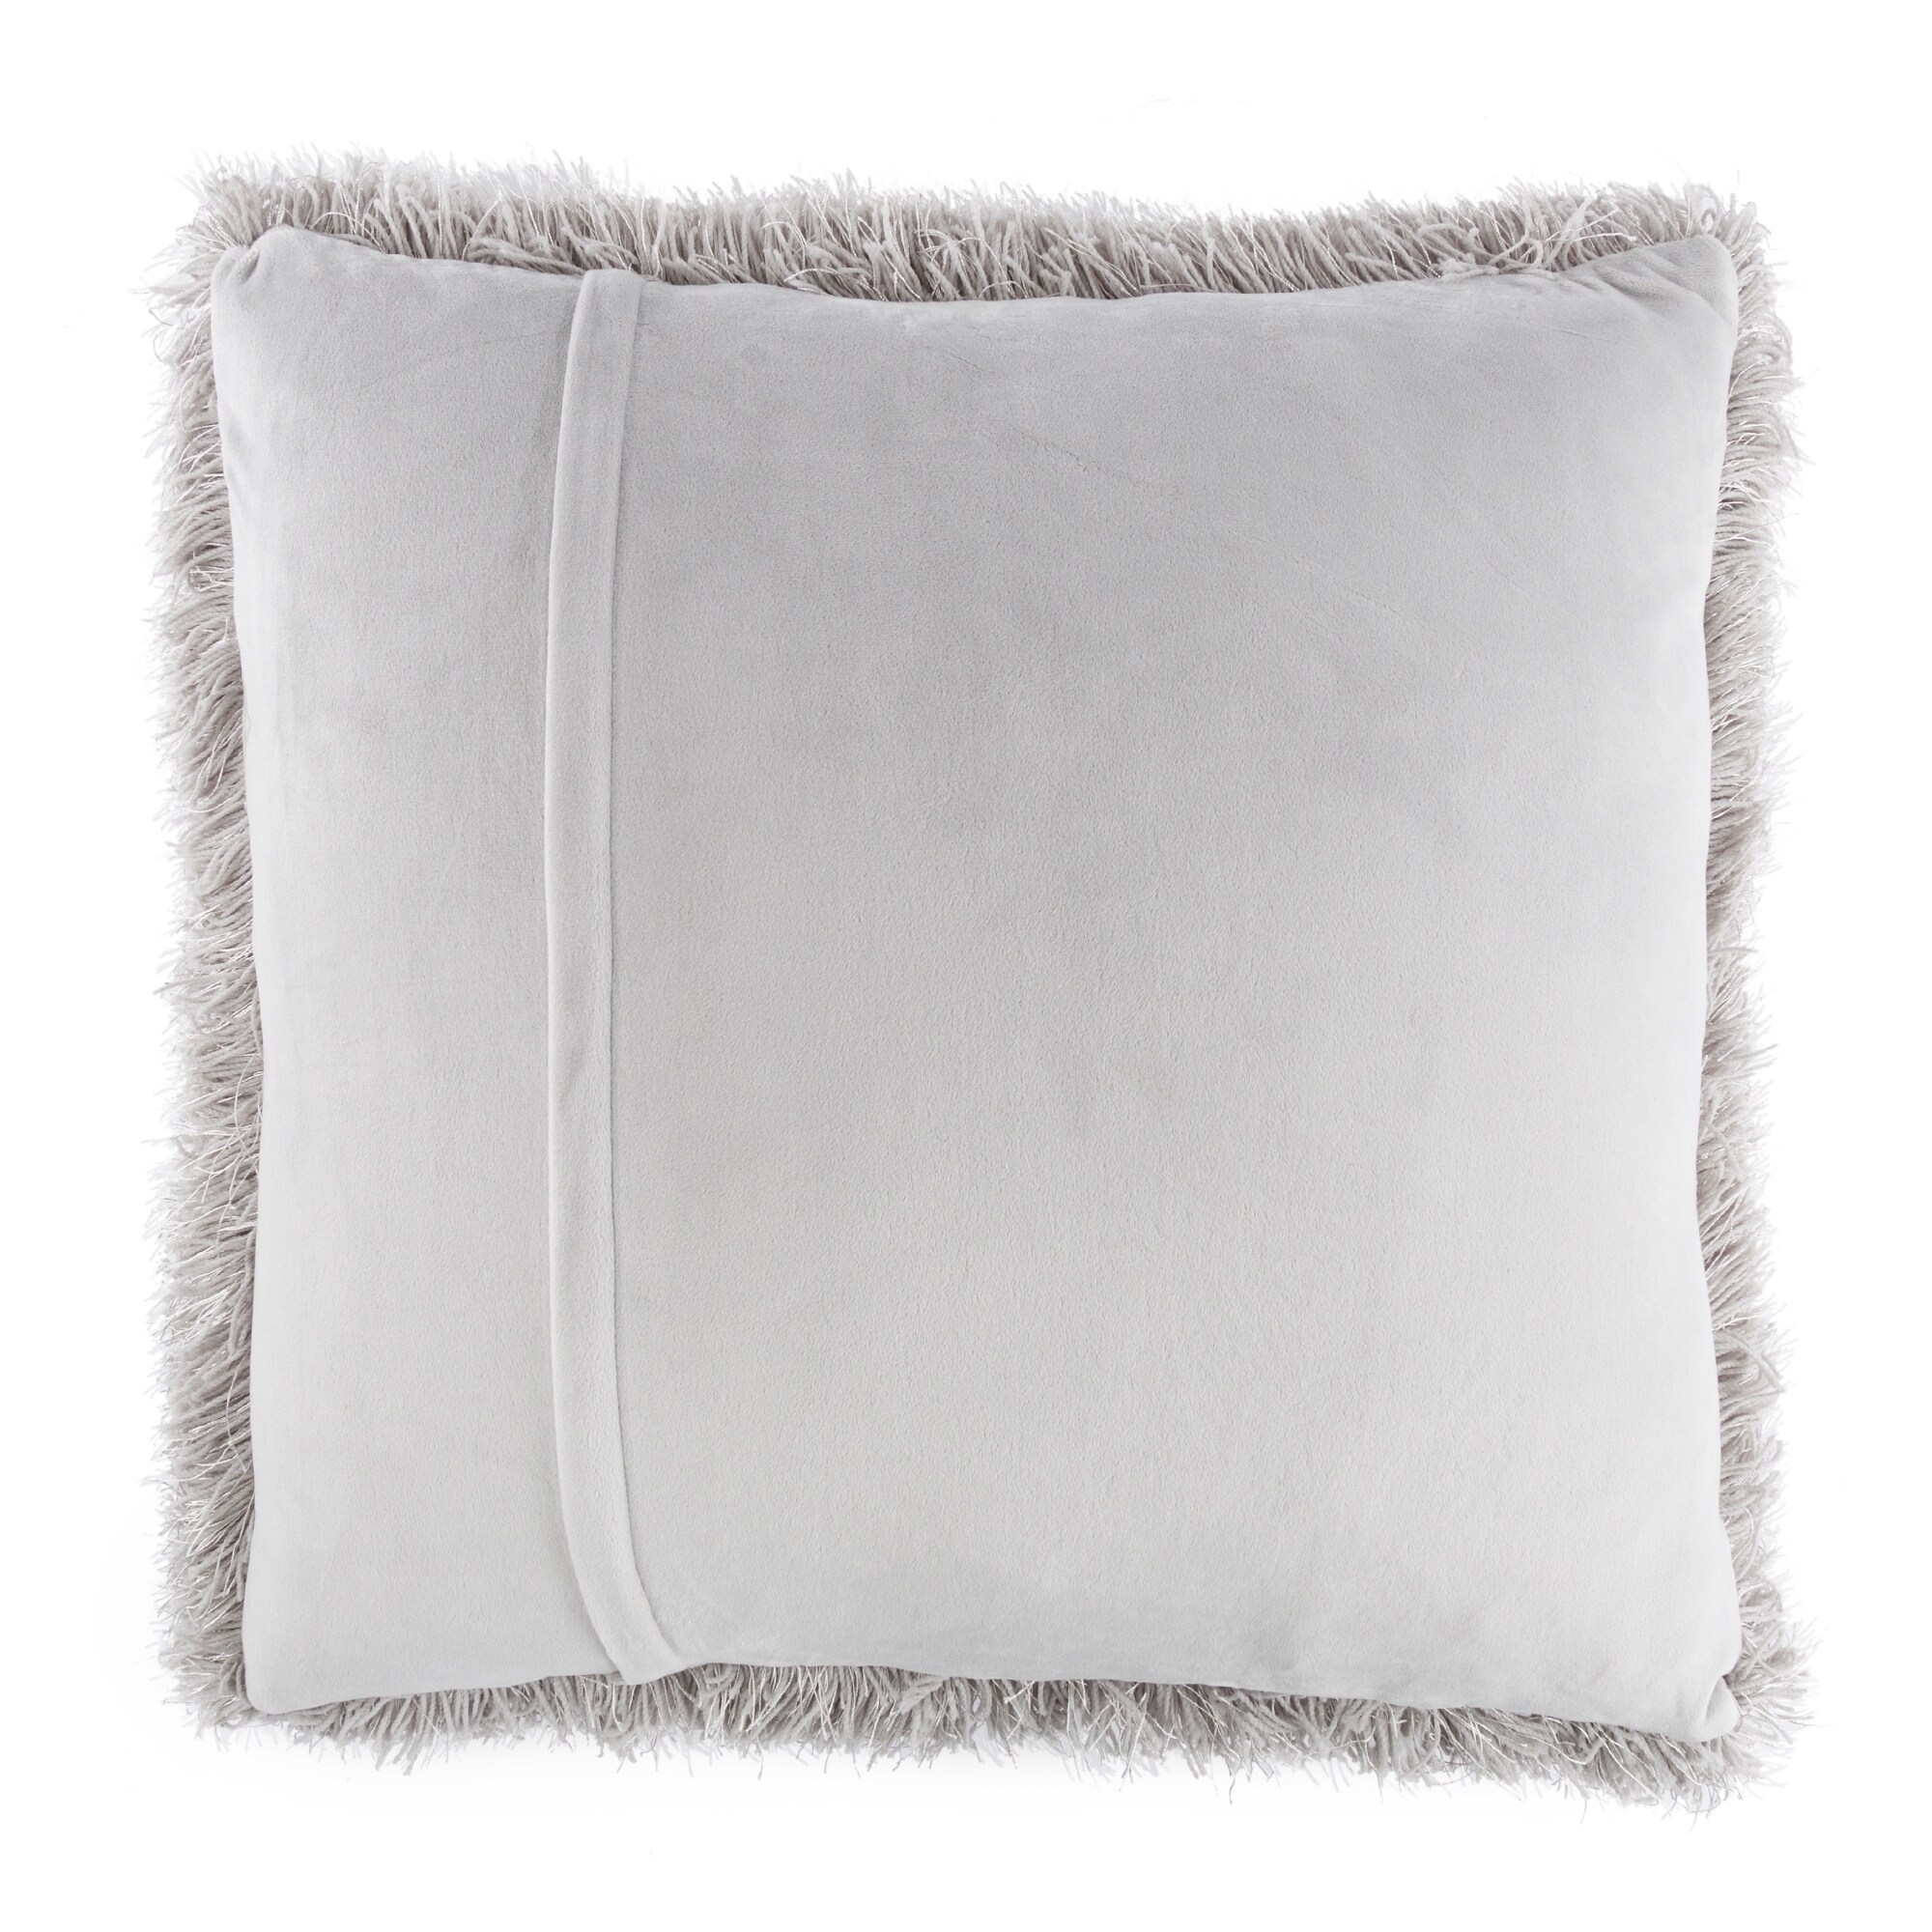 https://ak1.ostkcdn.com/images/products/is/images/direct/972f7062a968f6a3f56379076b81fad283b375f2/Oversized-Floor-or-Throw-Pillow-Square-Shag-FauxFur-by-Windsor-Home.jpg